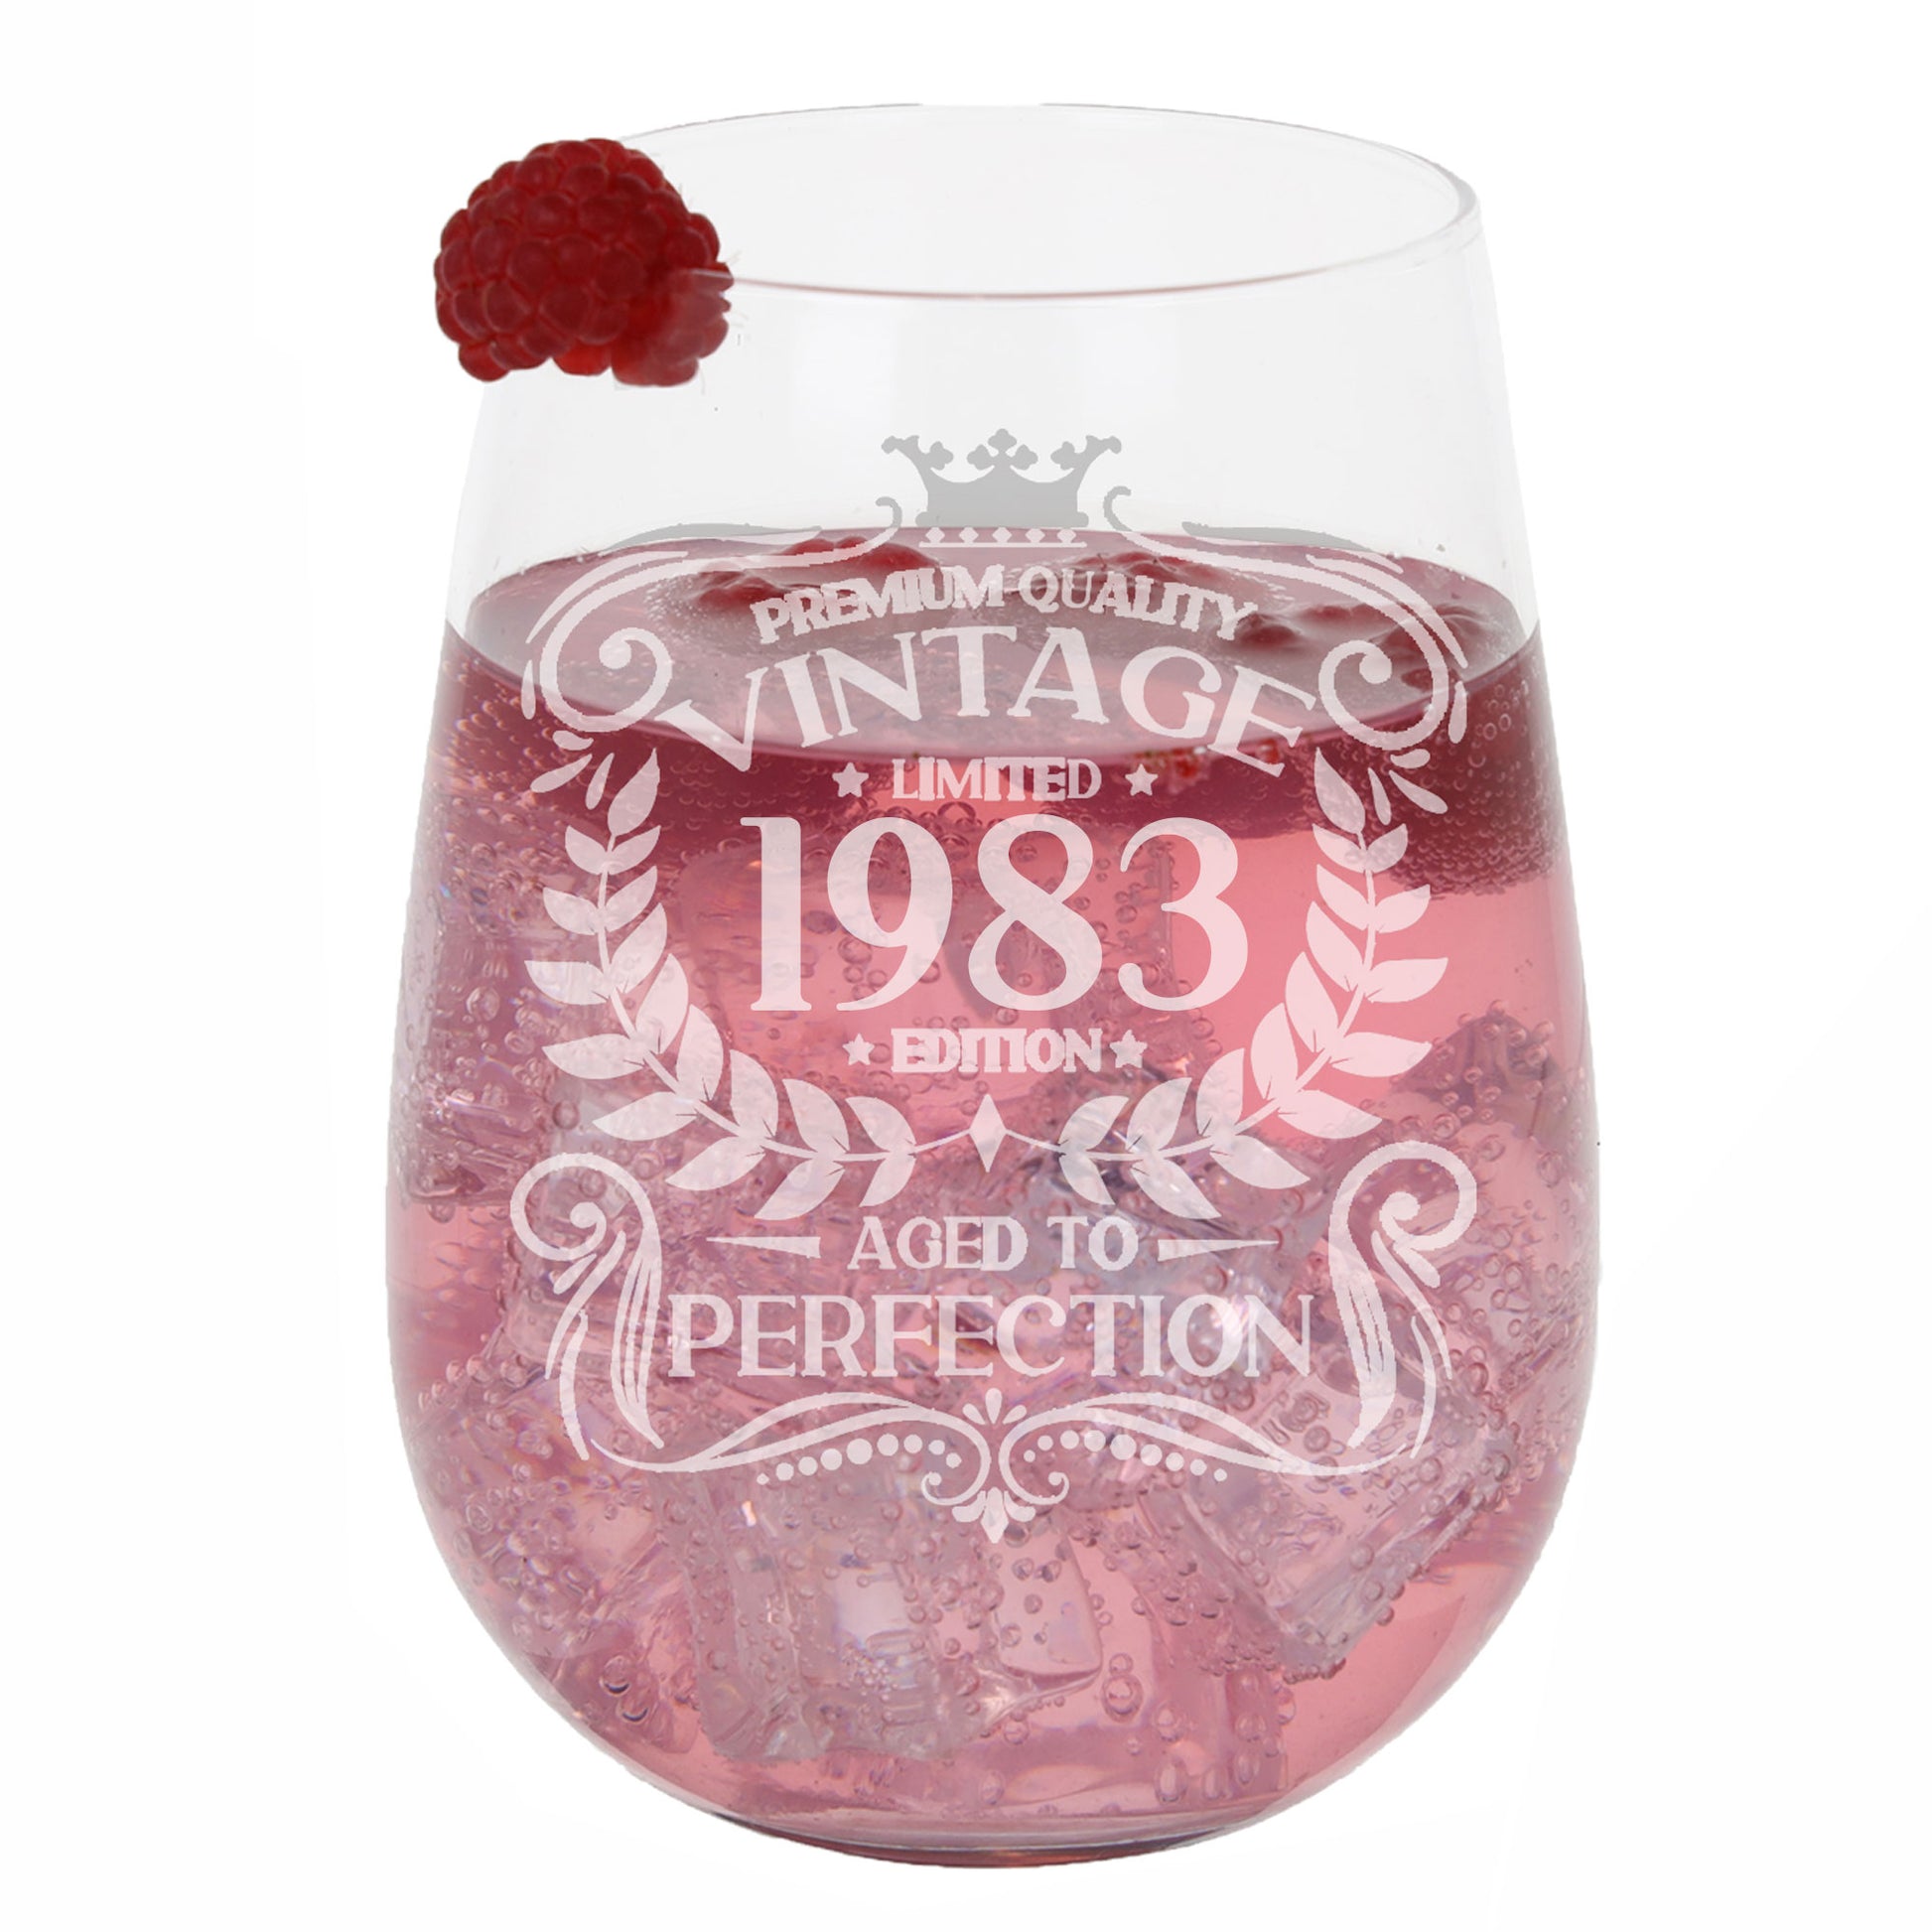 Vintage 1983 40th Birthday Engraved Stemless Gin Glass Gift  - Always Looking Good -   